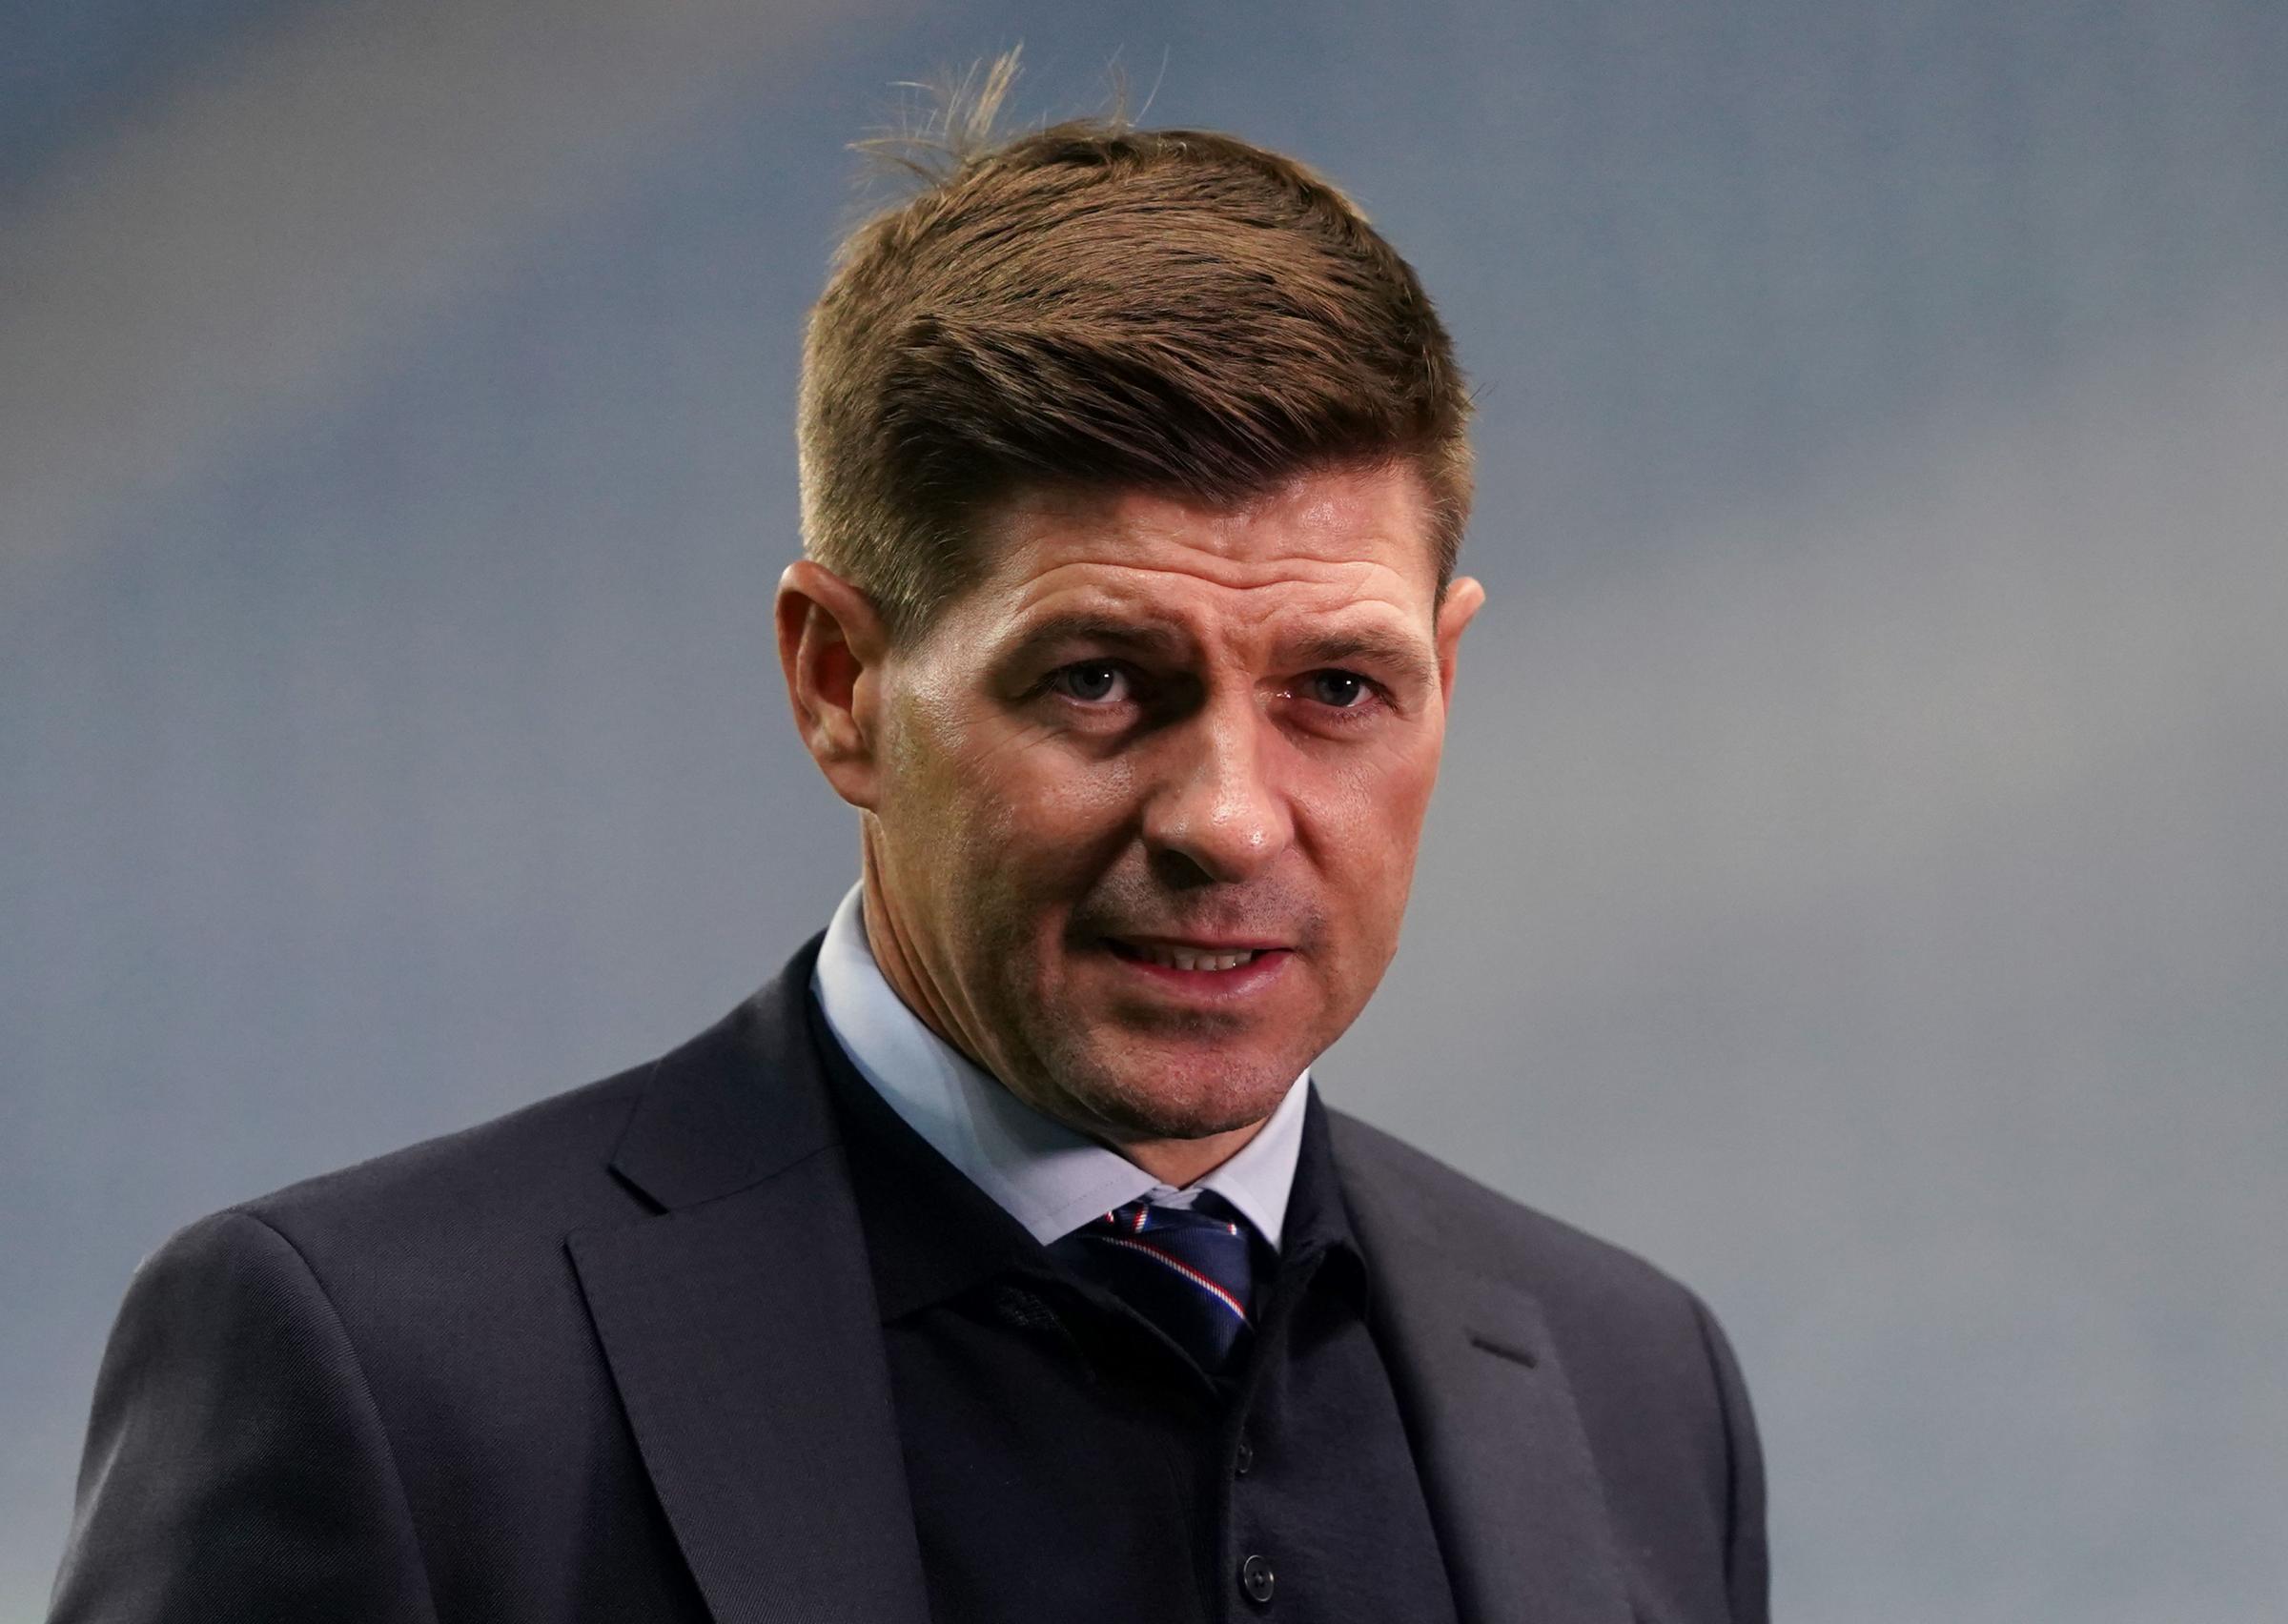 Rangers boss Steven Gerrard makes 'difficult to stop' prediction after emphatic Ibrox win